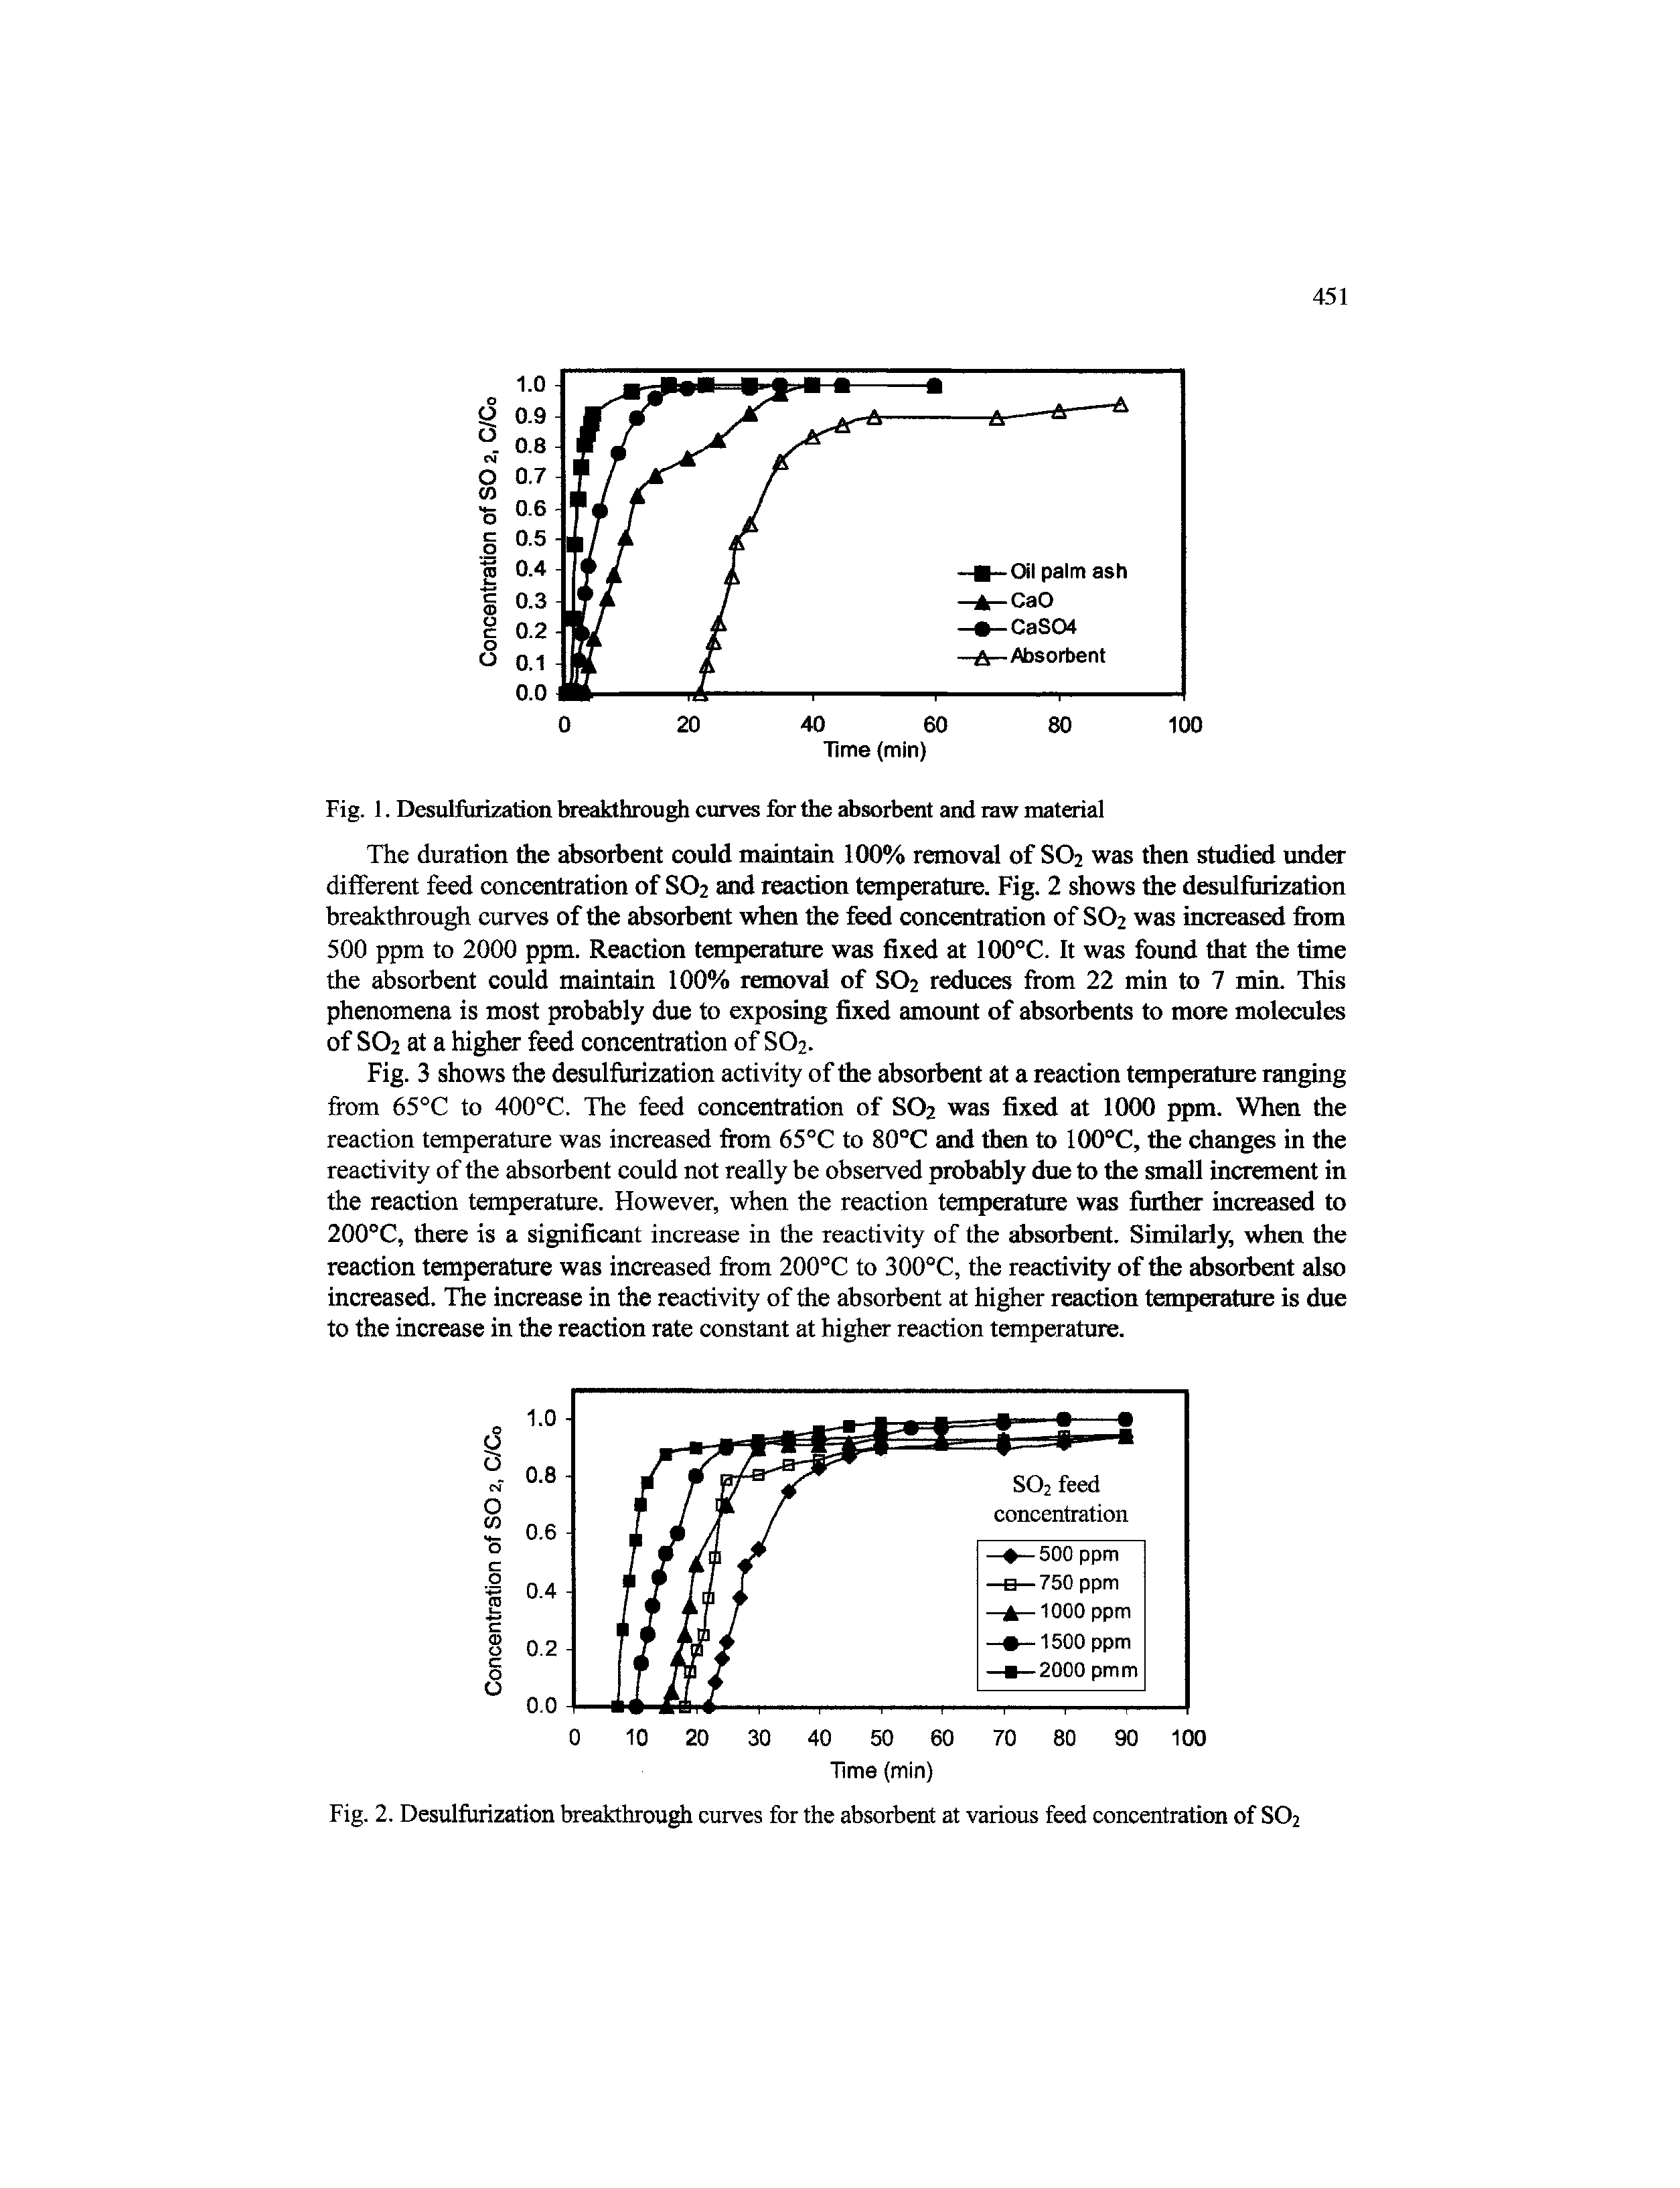 Fig. 2. Desulfurization breakthrough curves for the absorbent at various feed concentration of SO2...